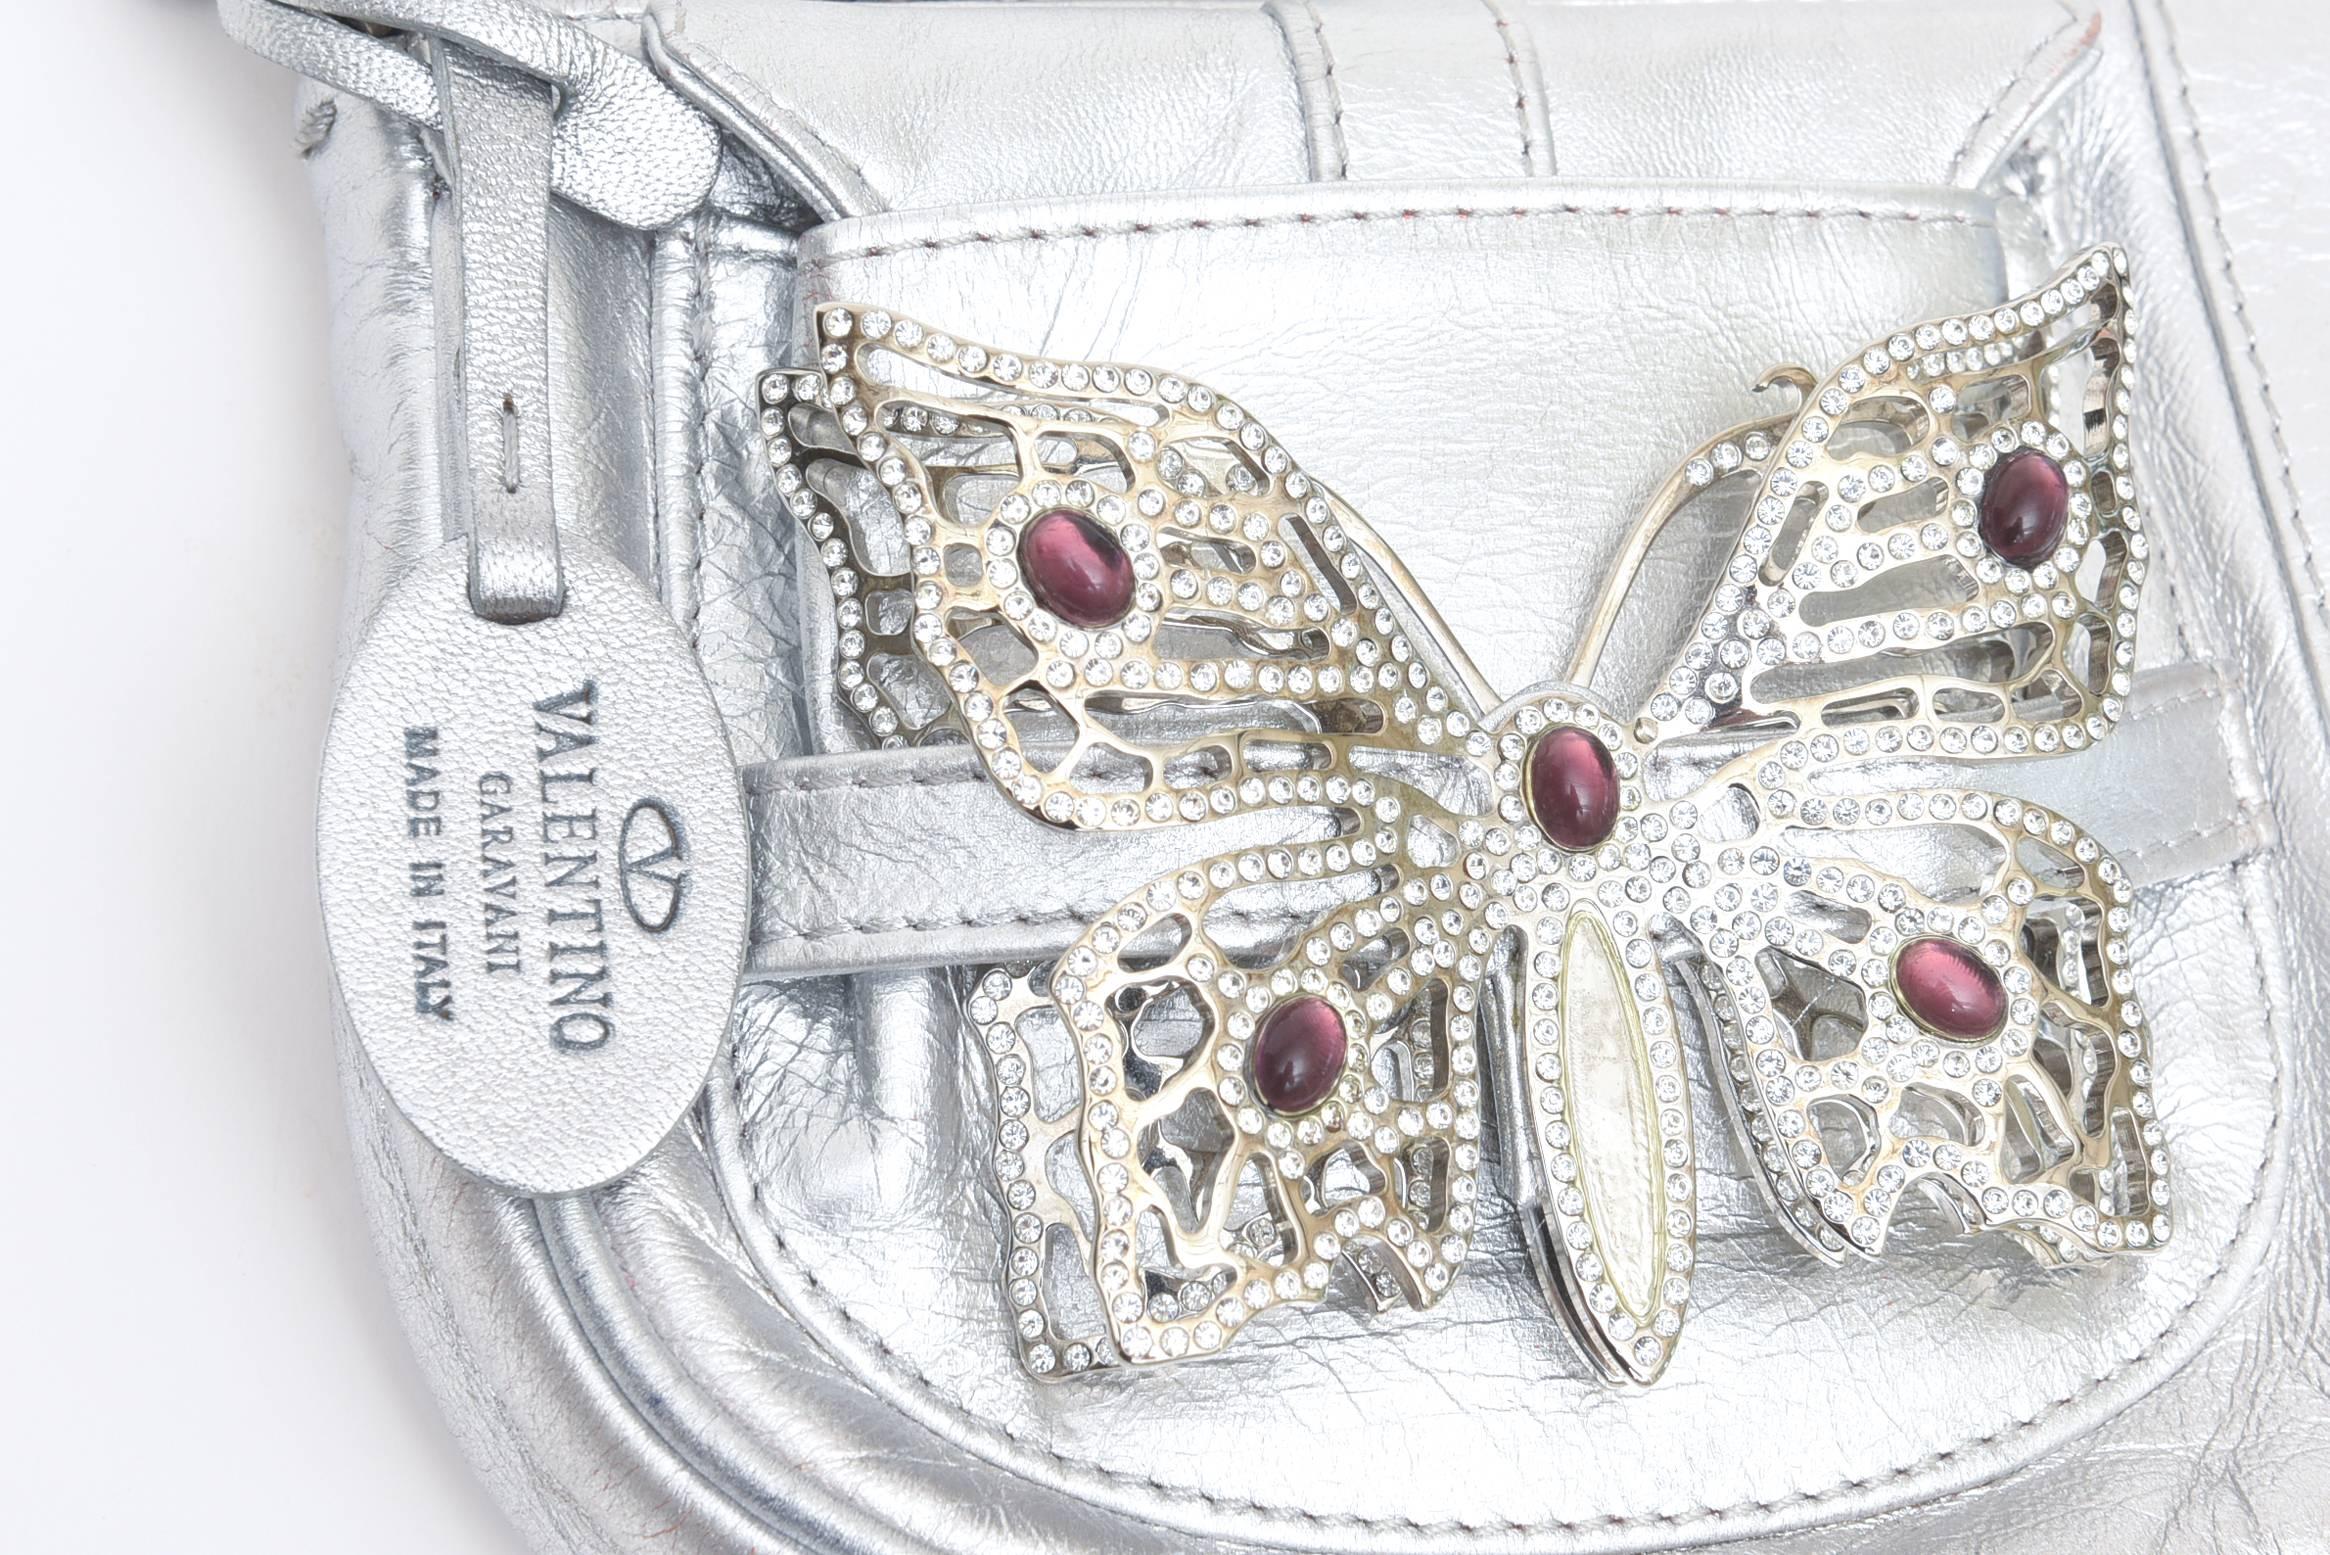 This lovely Valentino silver shoulder carrying handbag bag for day or evening is in the ever neutral silver lambskin leather with a dramatic purple and clear rhinestone butterfly for good luck.
It is from the 90's and has a front flip pocket and a